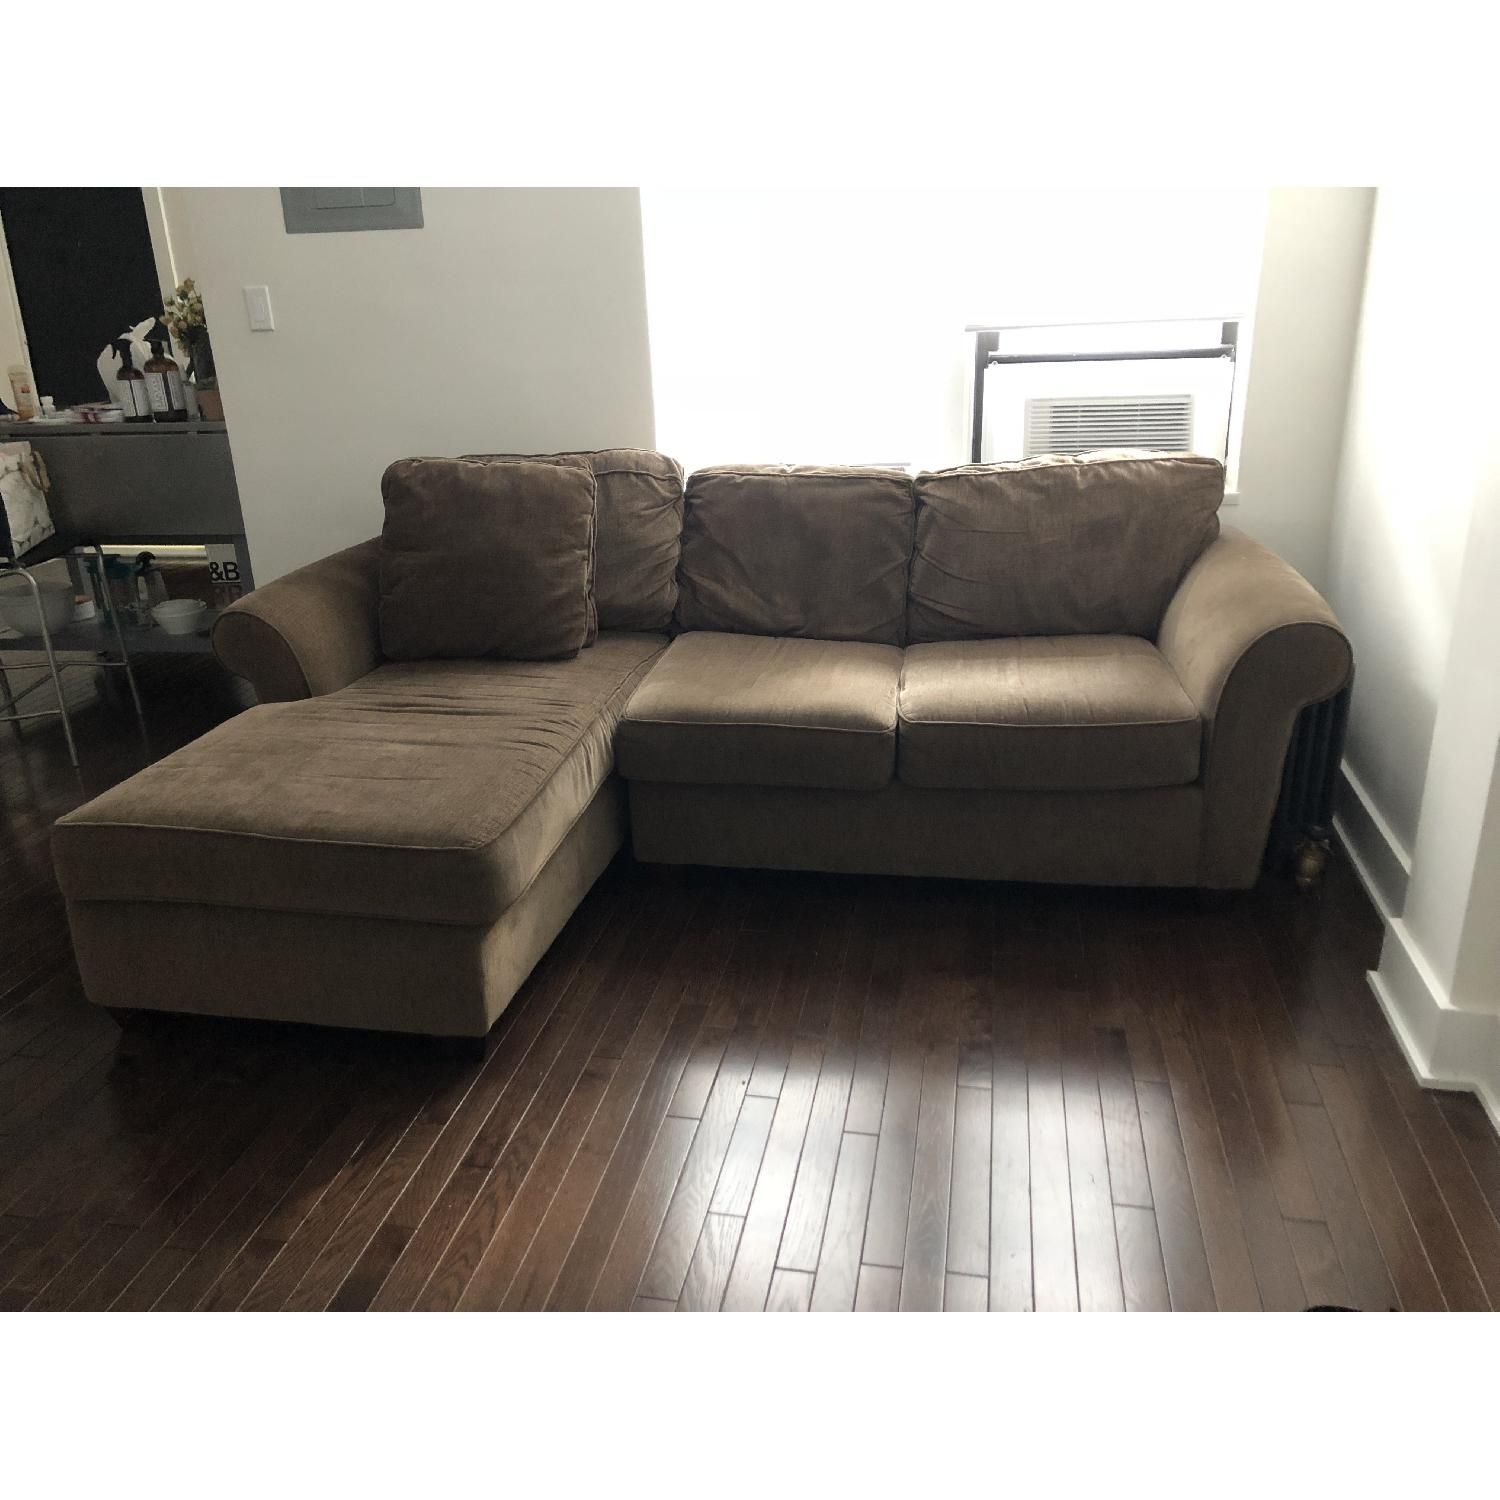 2 Piece Chaise Sectional Sofa | Baci Living Room Inside Tenny Cognac 2 Piece Right Facing Chaise Sectionals With 2 Headrest (View 8 of 25)